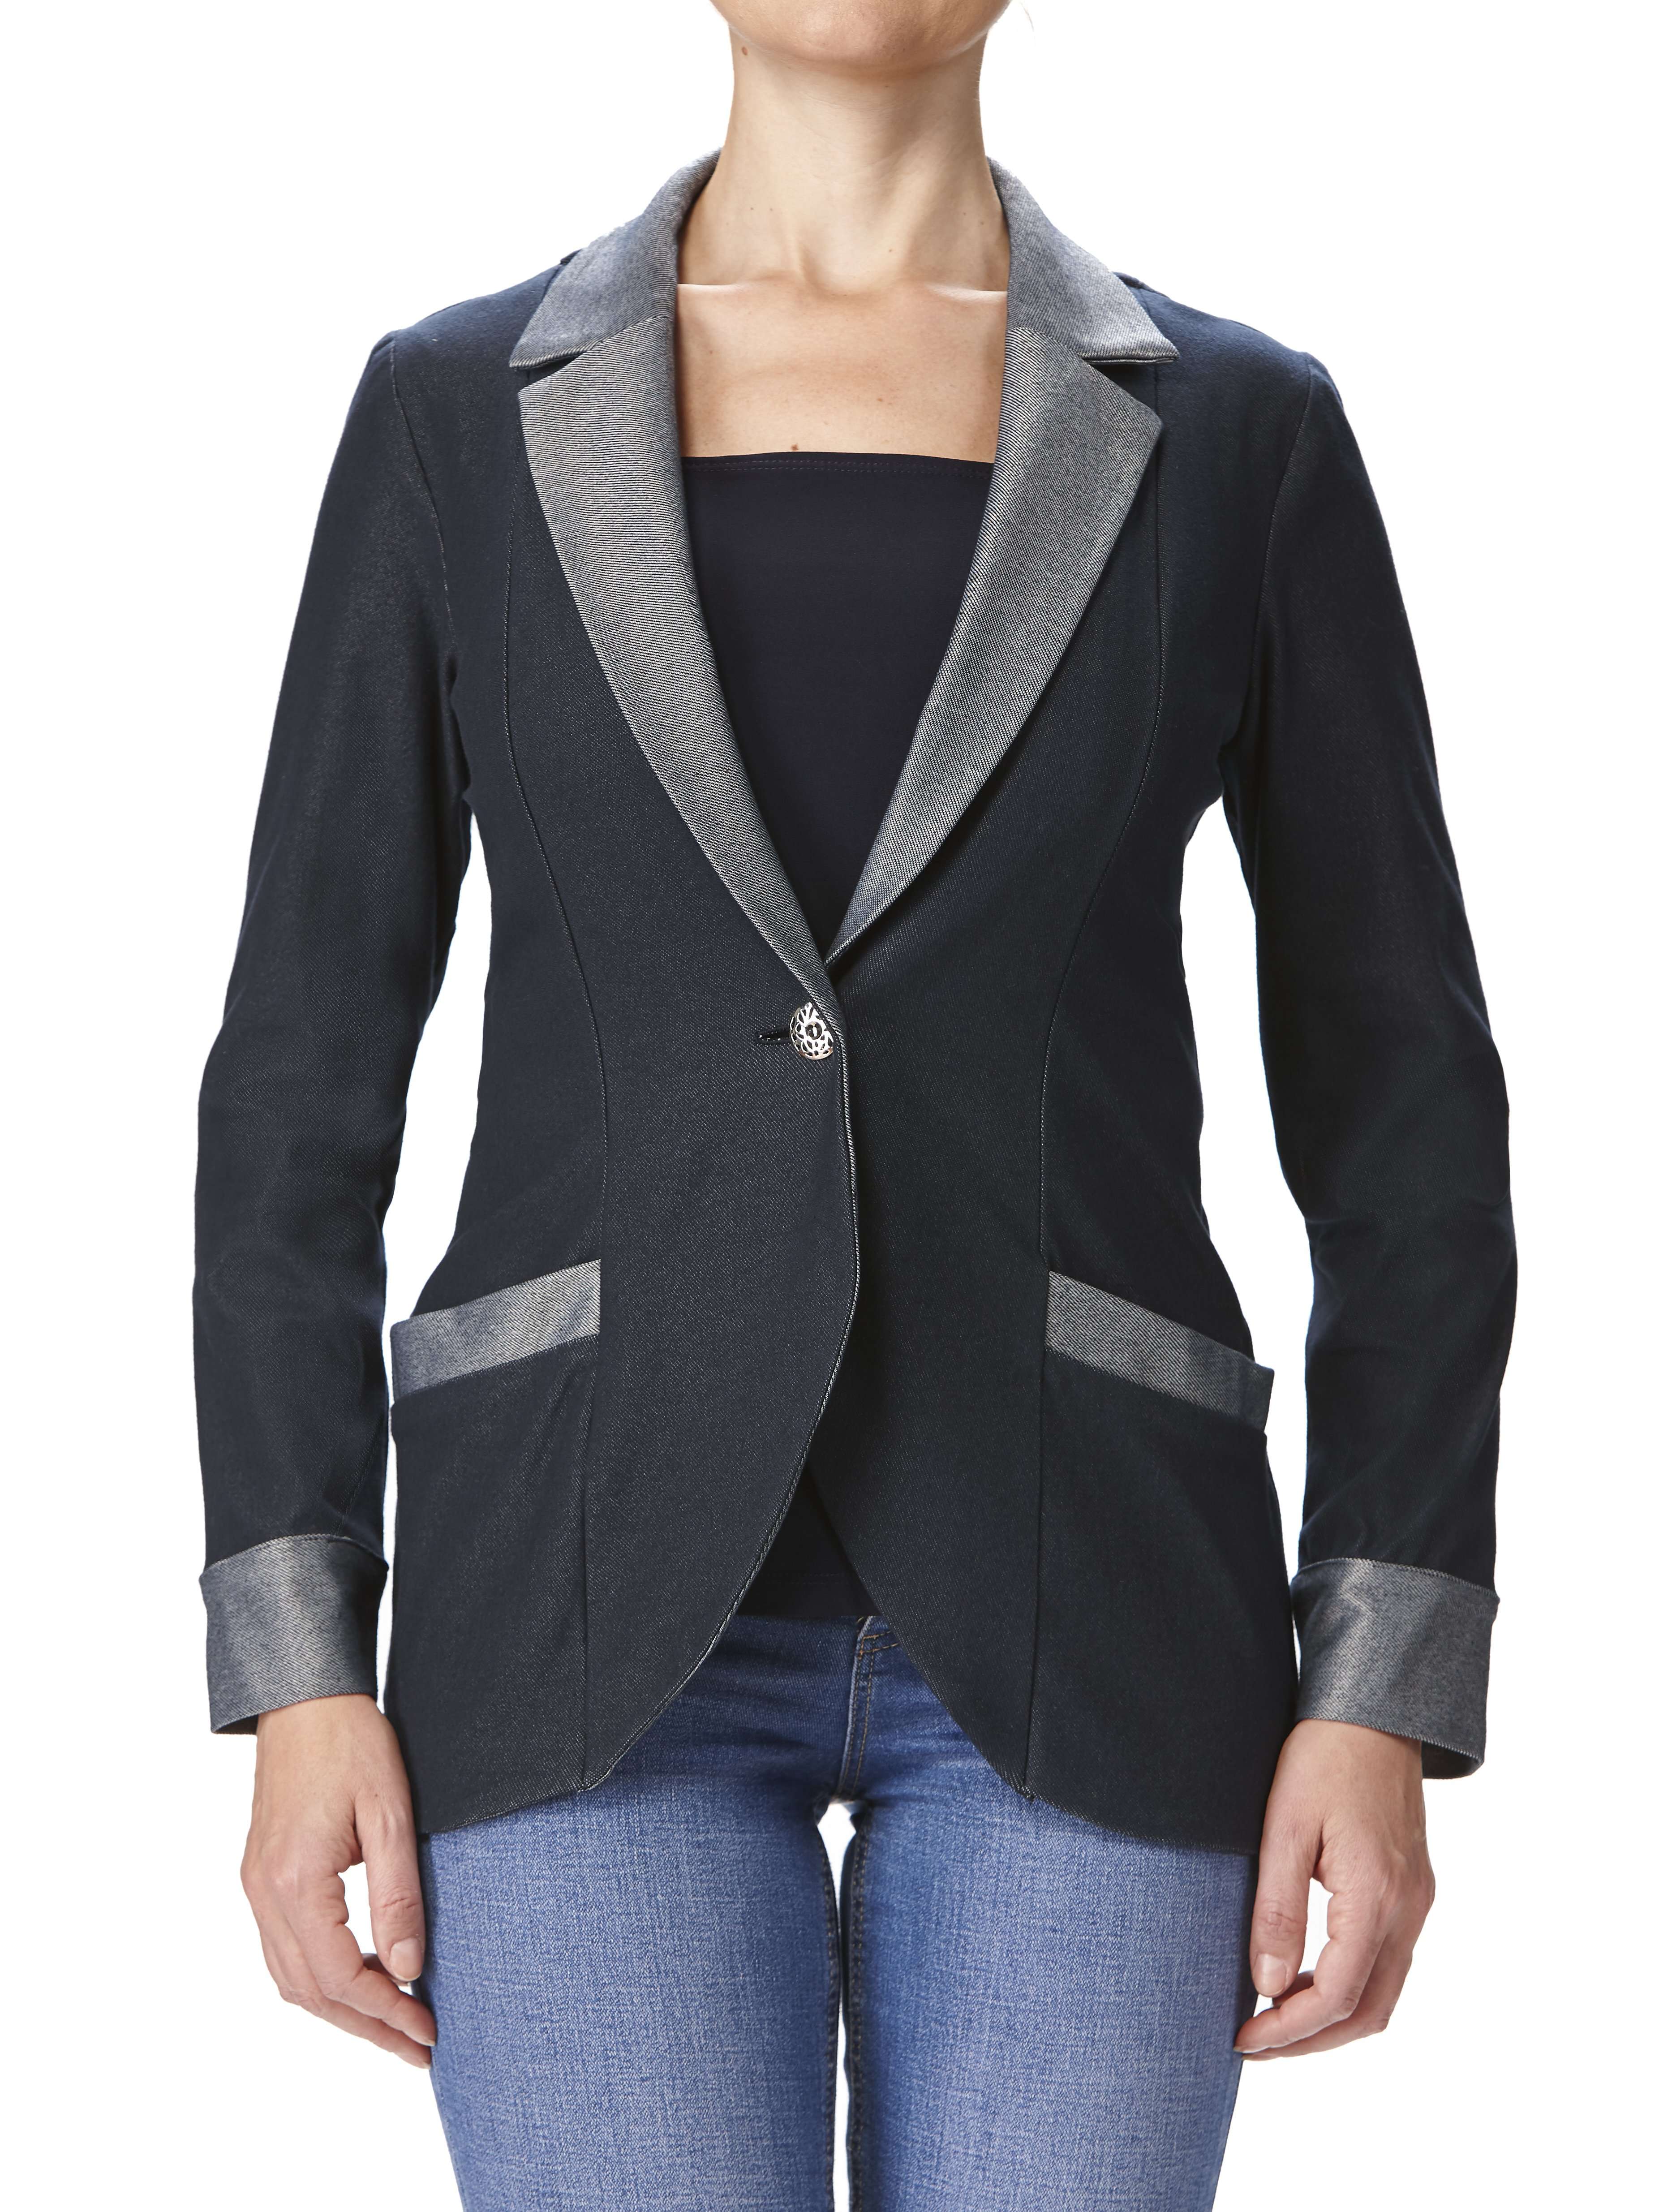 Women's Denim Blue Blazer Jacket Amazing Fit And Quality True To Size Fit Proudly Made in Canada - Yvonne Marie - Yvonne Marie